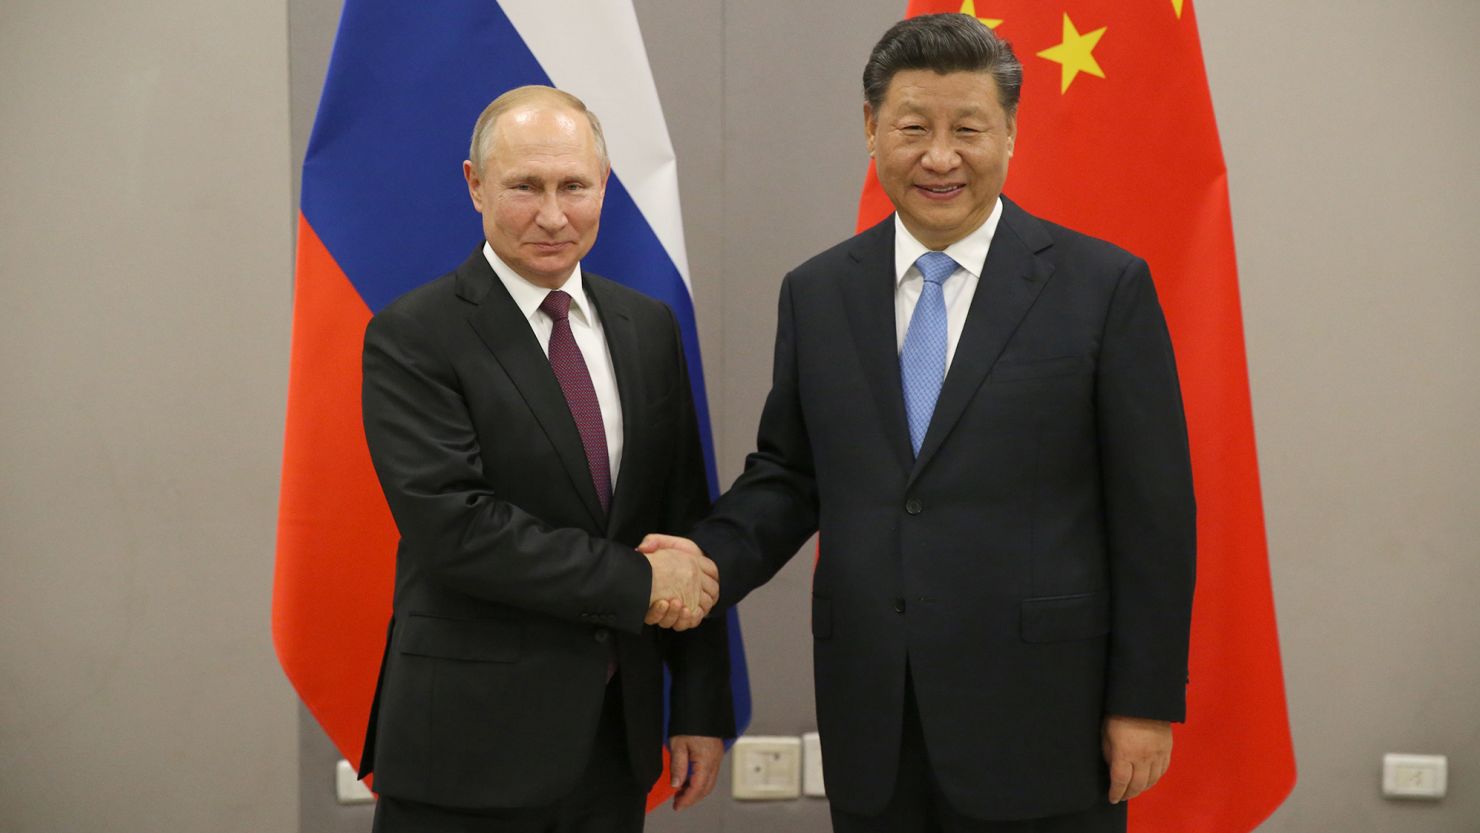 Russian President Vladimir Putin and Chinese leader Xi Jinping during a bilateral meeting on November 13, 2019 in Brasilia, Brazil.